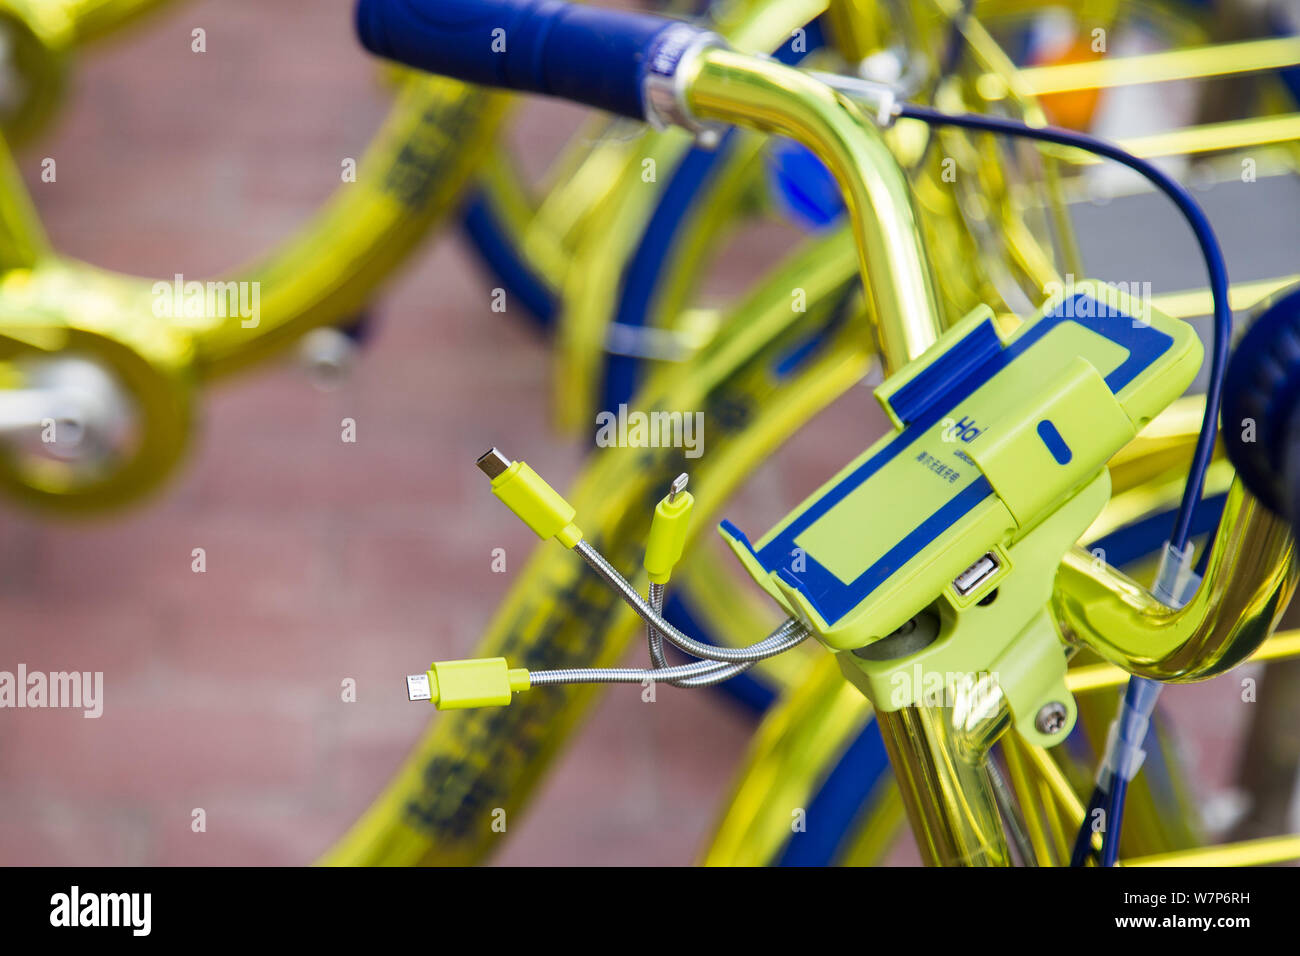 A phone holder is seen on a golden bicycle of Chinese bike-sharing service Coolqi in Shenzhen city, south China's Guangdong province, 8 June 2017.   T Stock Photo